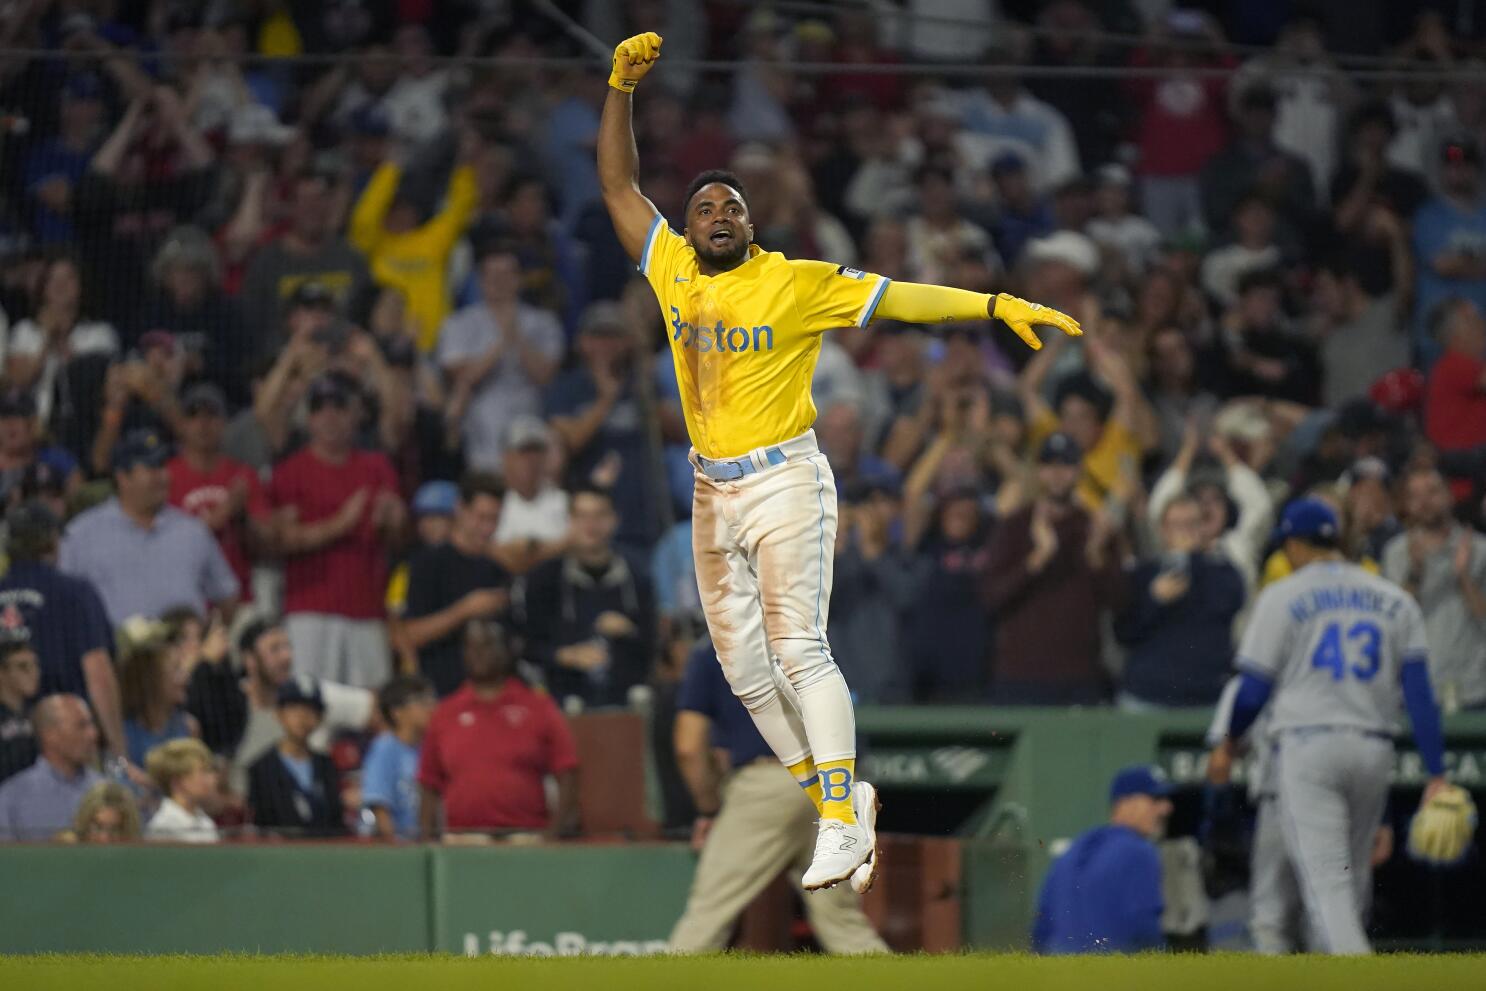 MLB rumors: Red Sox can wear yellow City Connect jerseys in